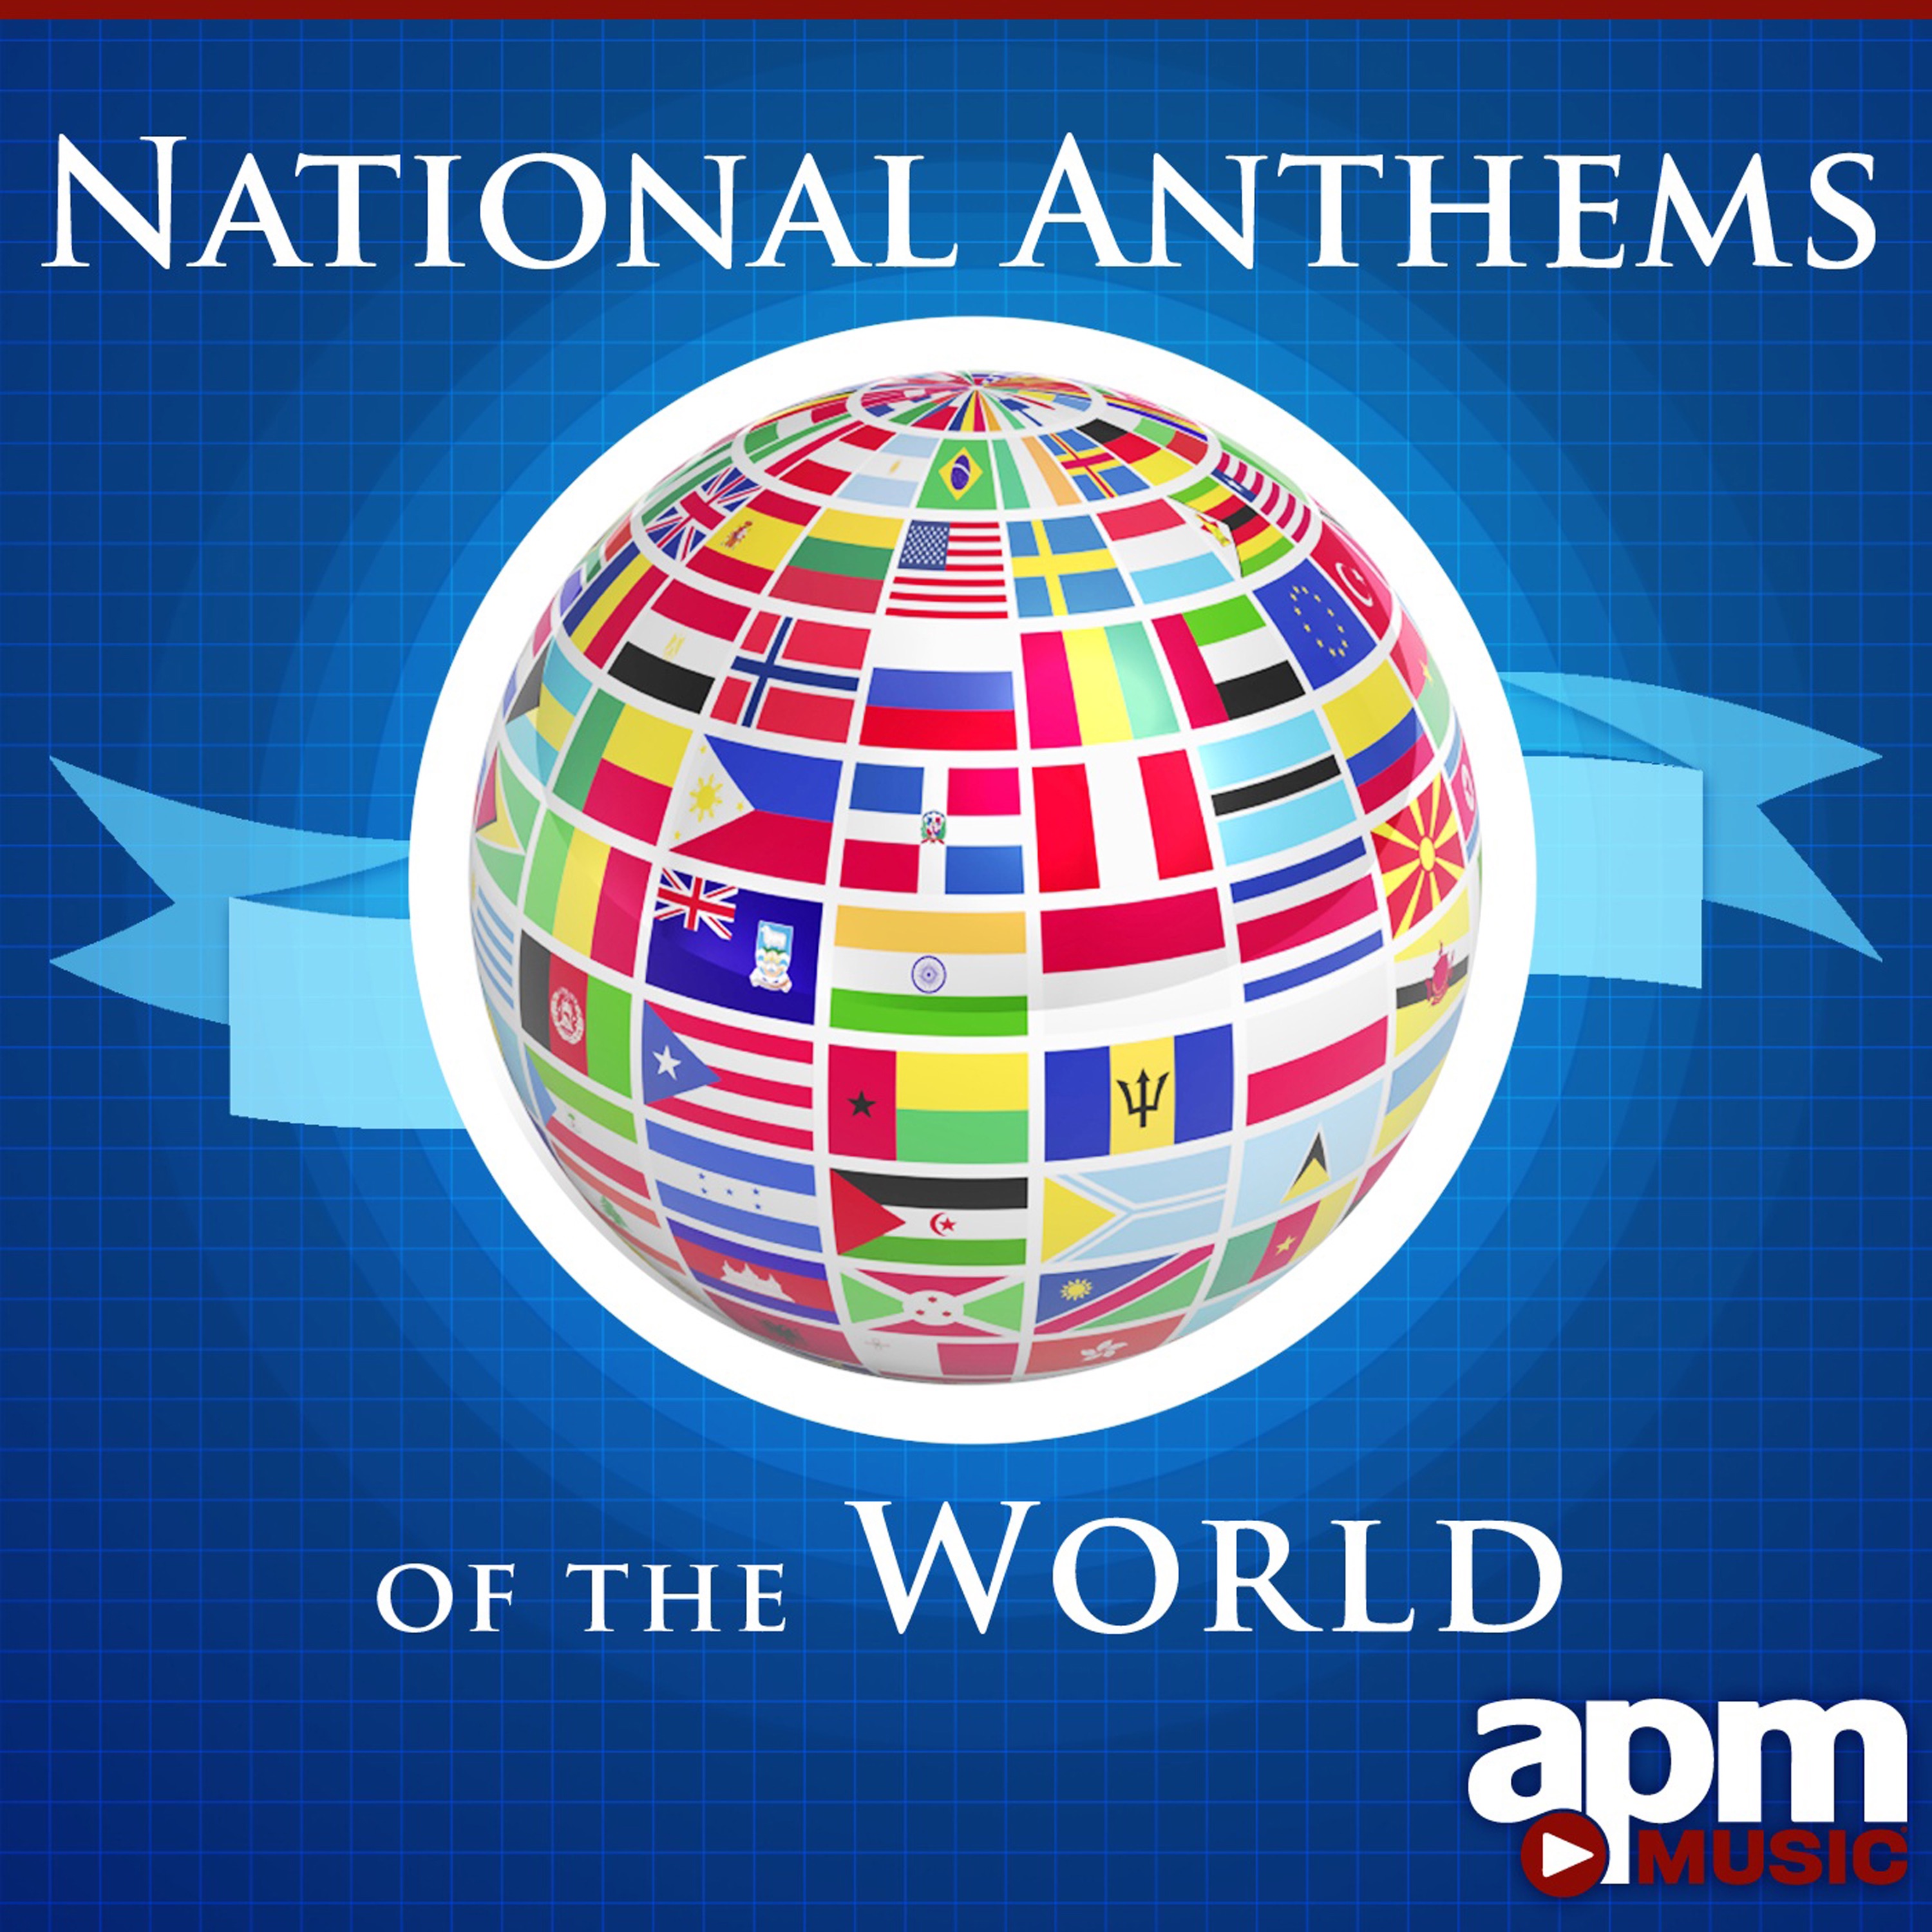 National Anthems Download archipotent